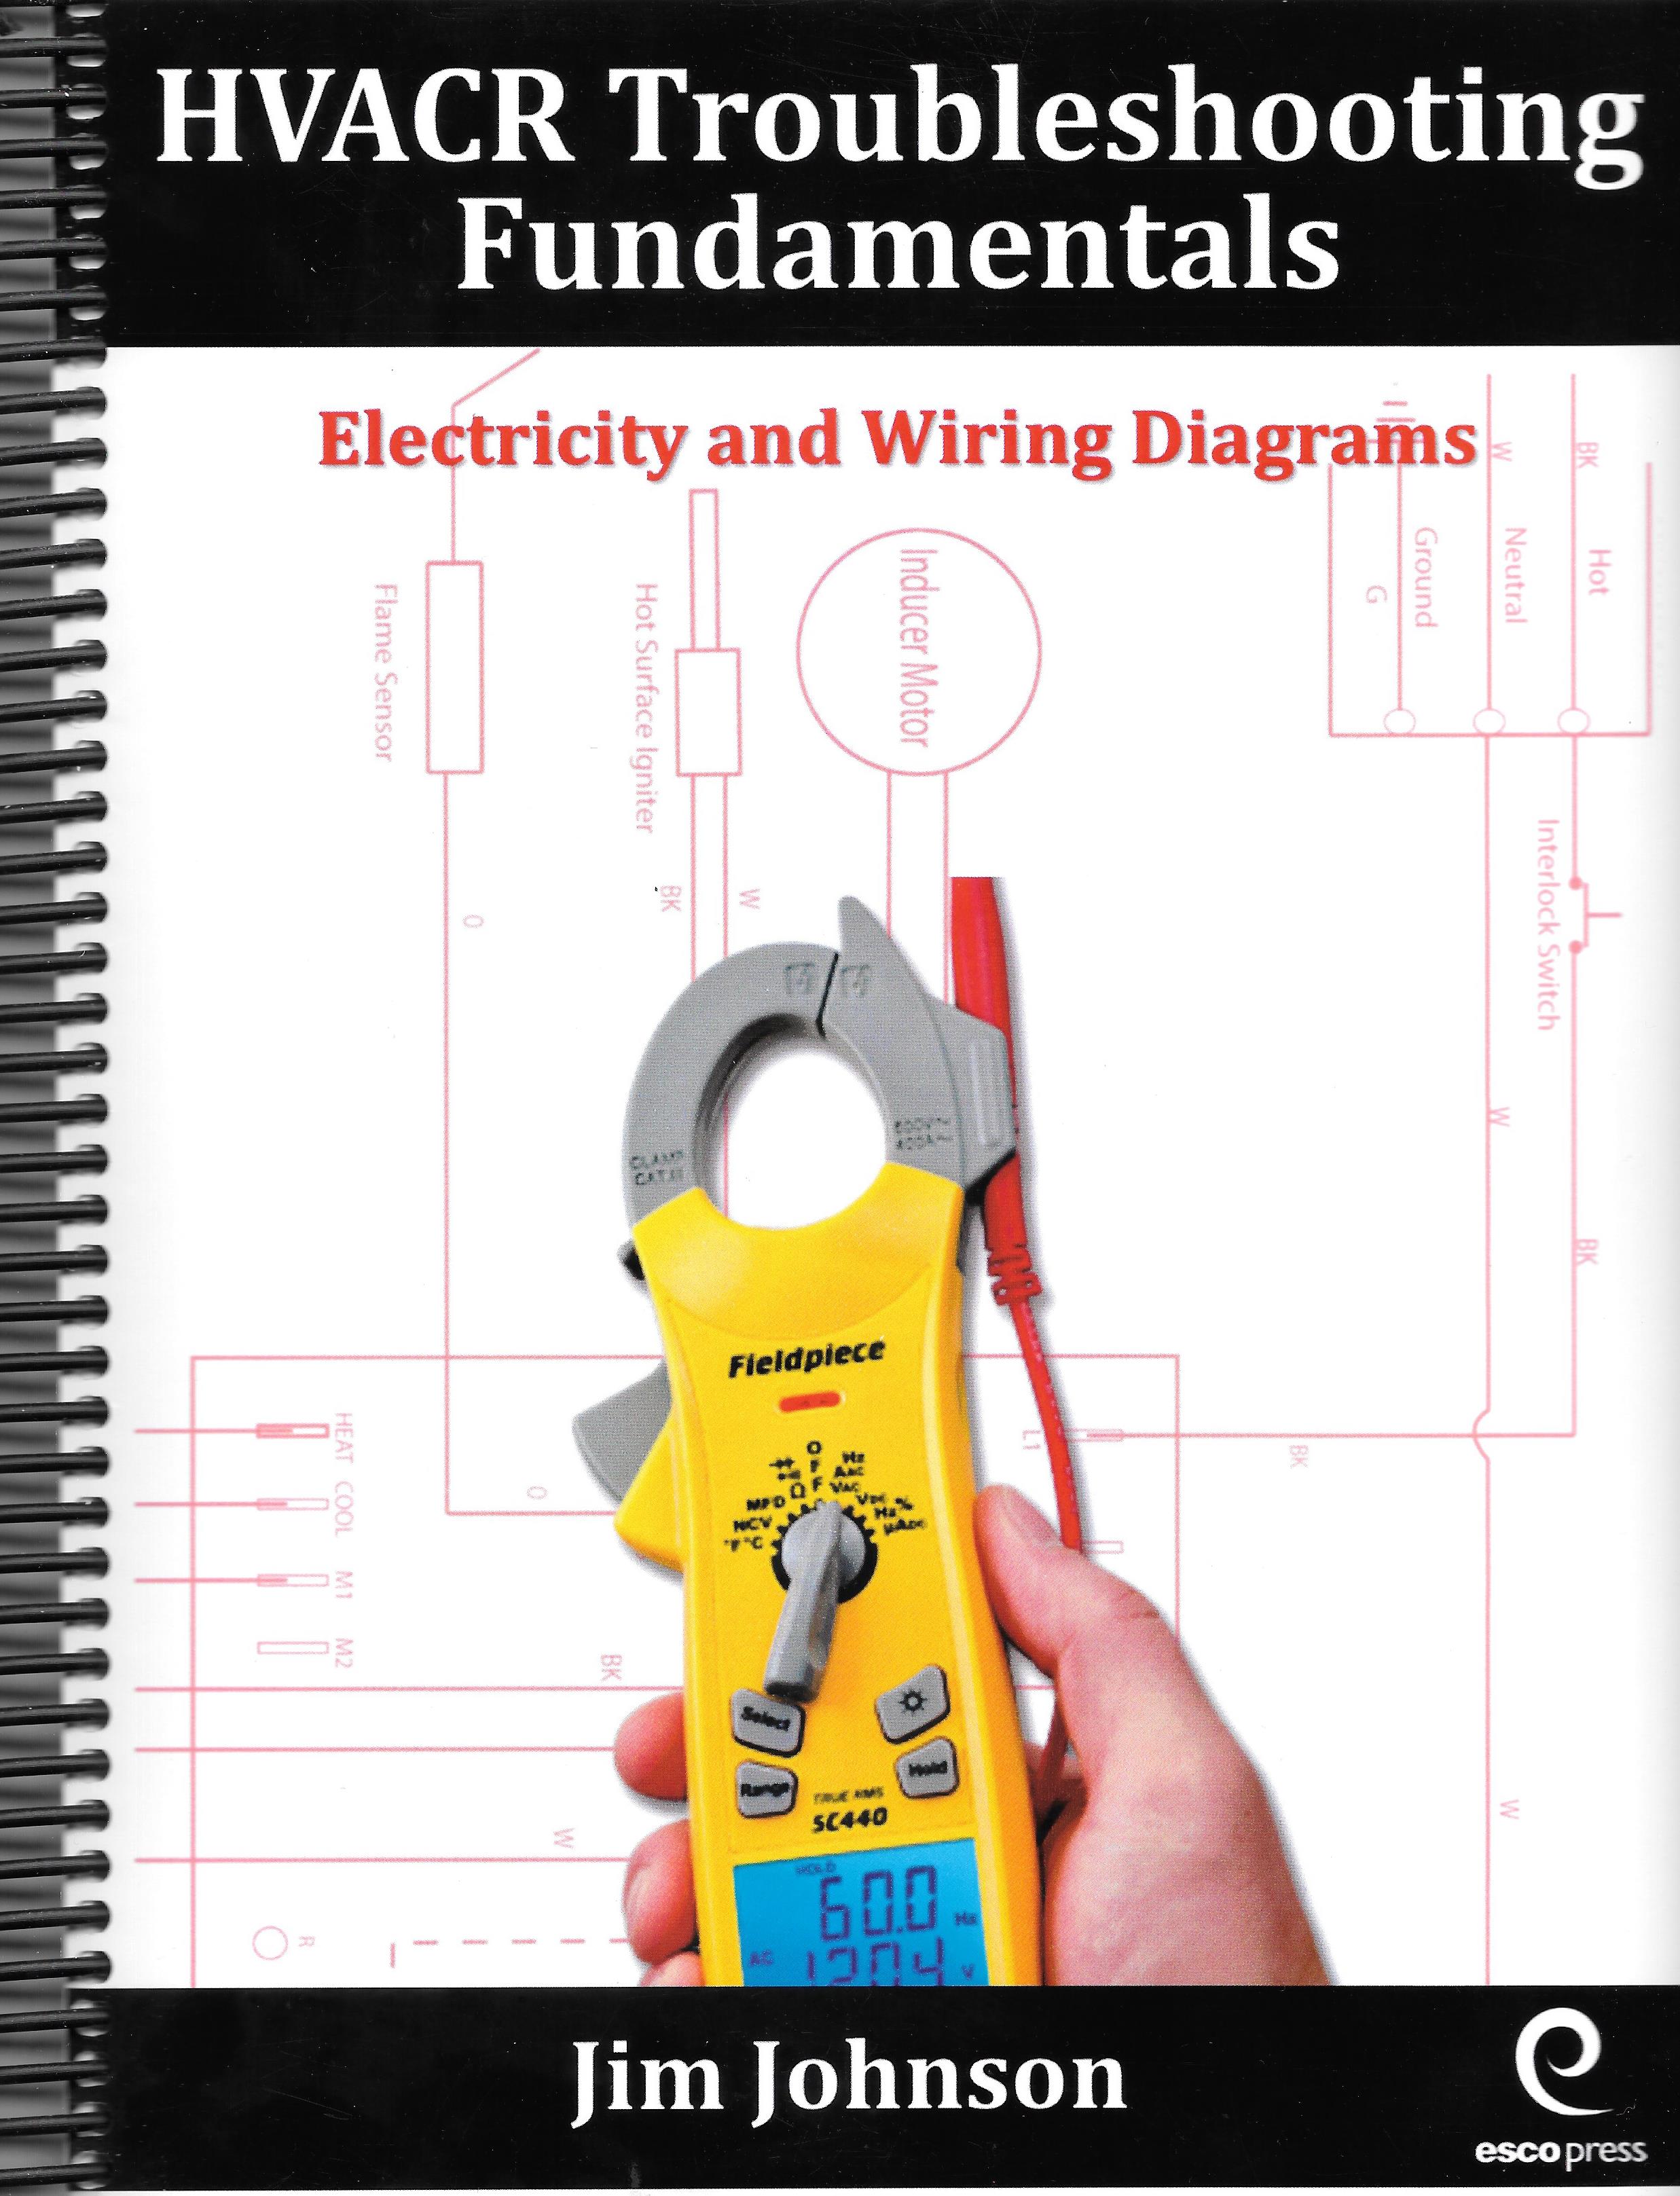 HVACR Troubleshooting Fundamentals  Electrical Book Cover Image.jpg